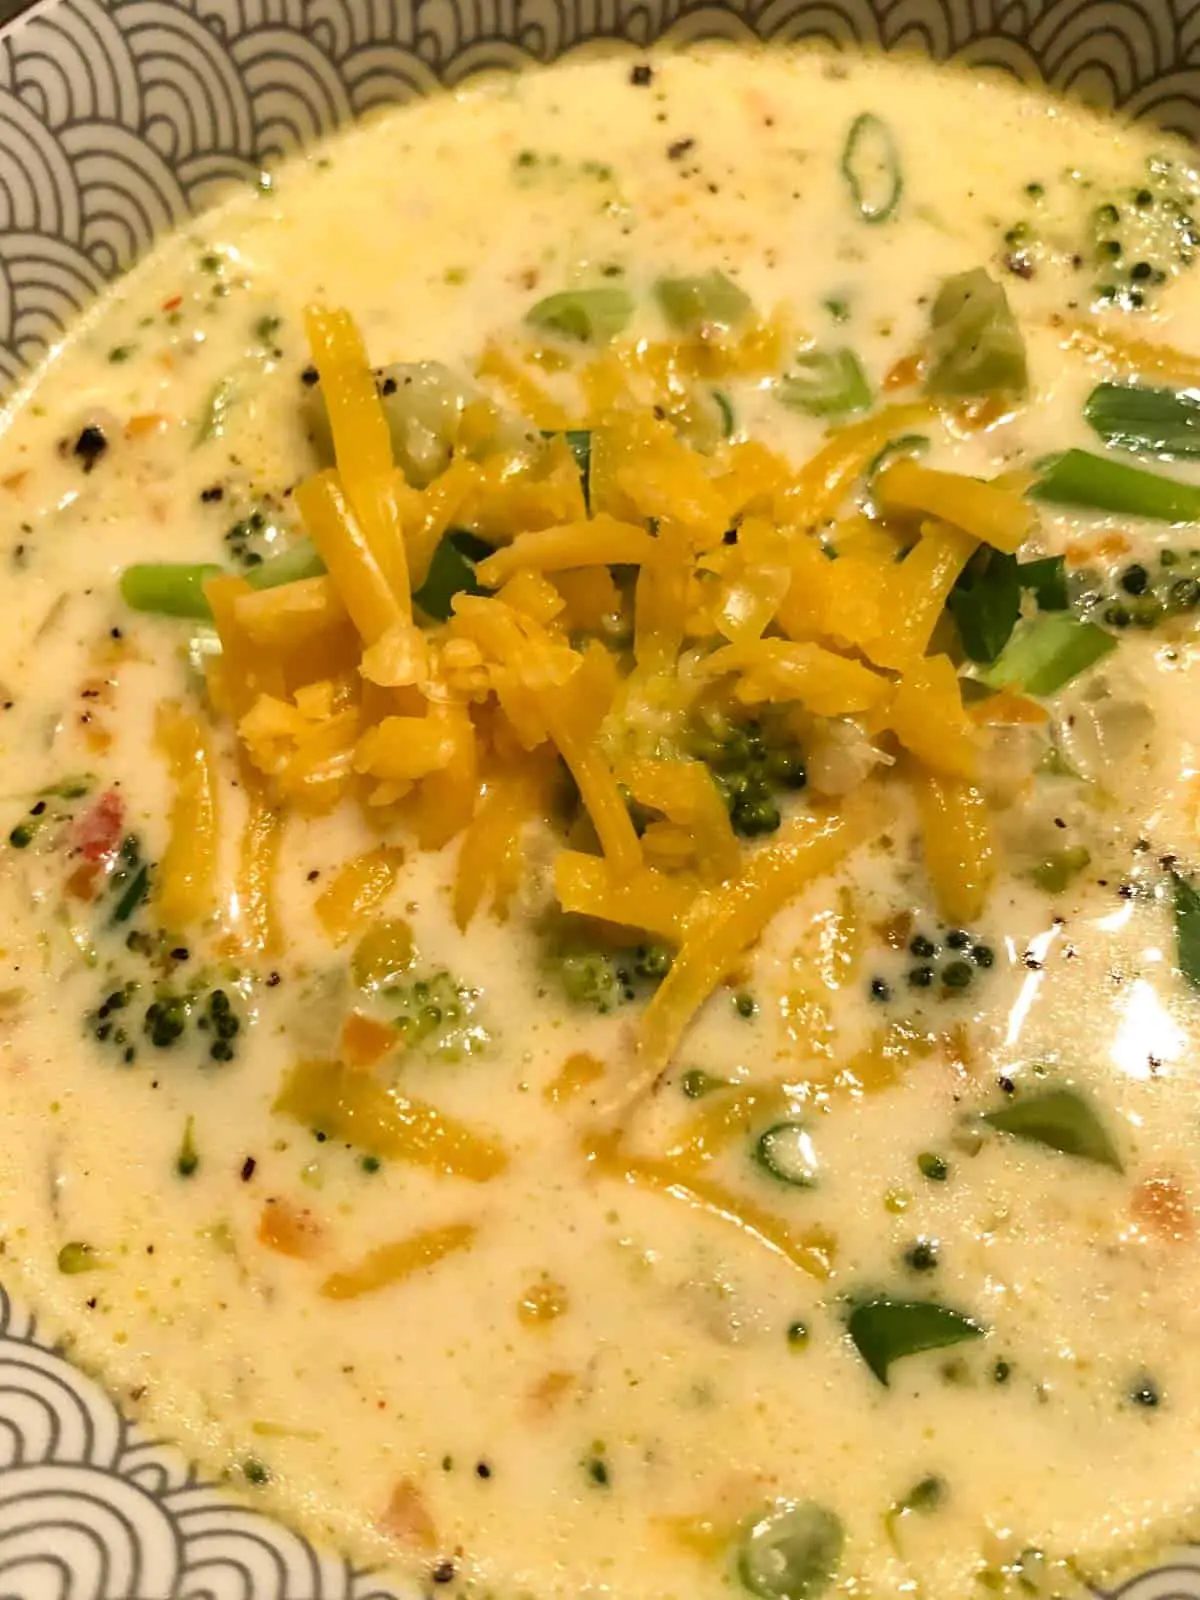 Broccoli and cheddar soup in a patterned bowl with green onions and shredded cheddar cheese as garnish.